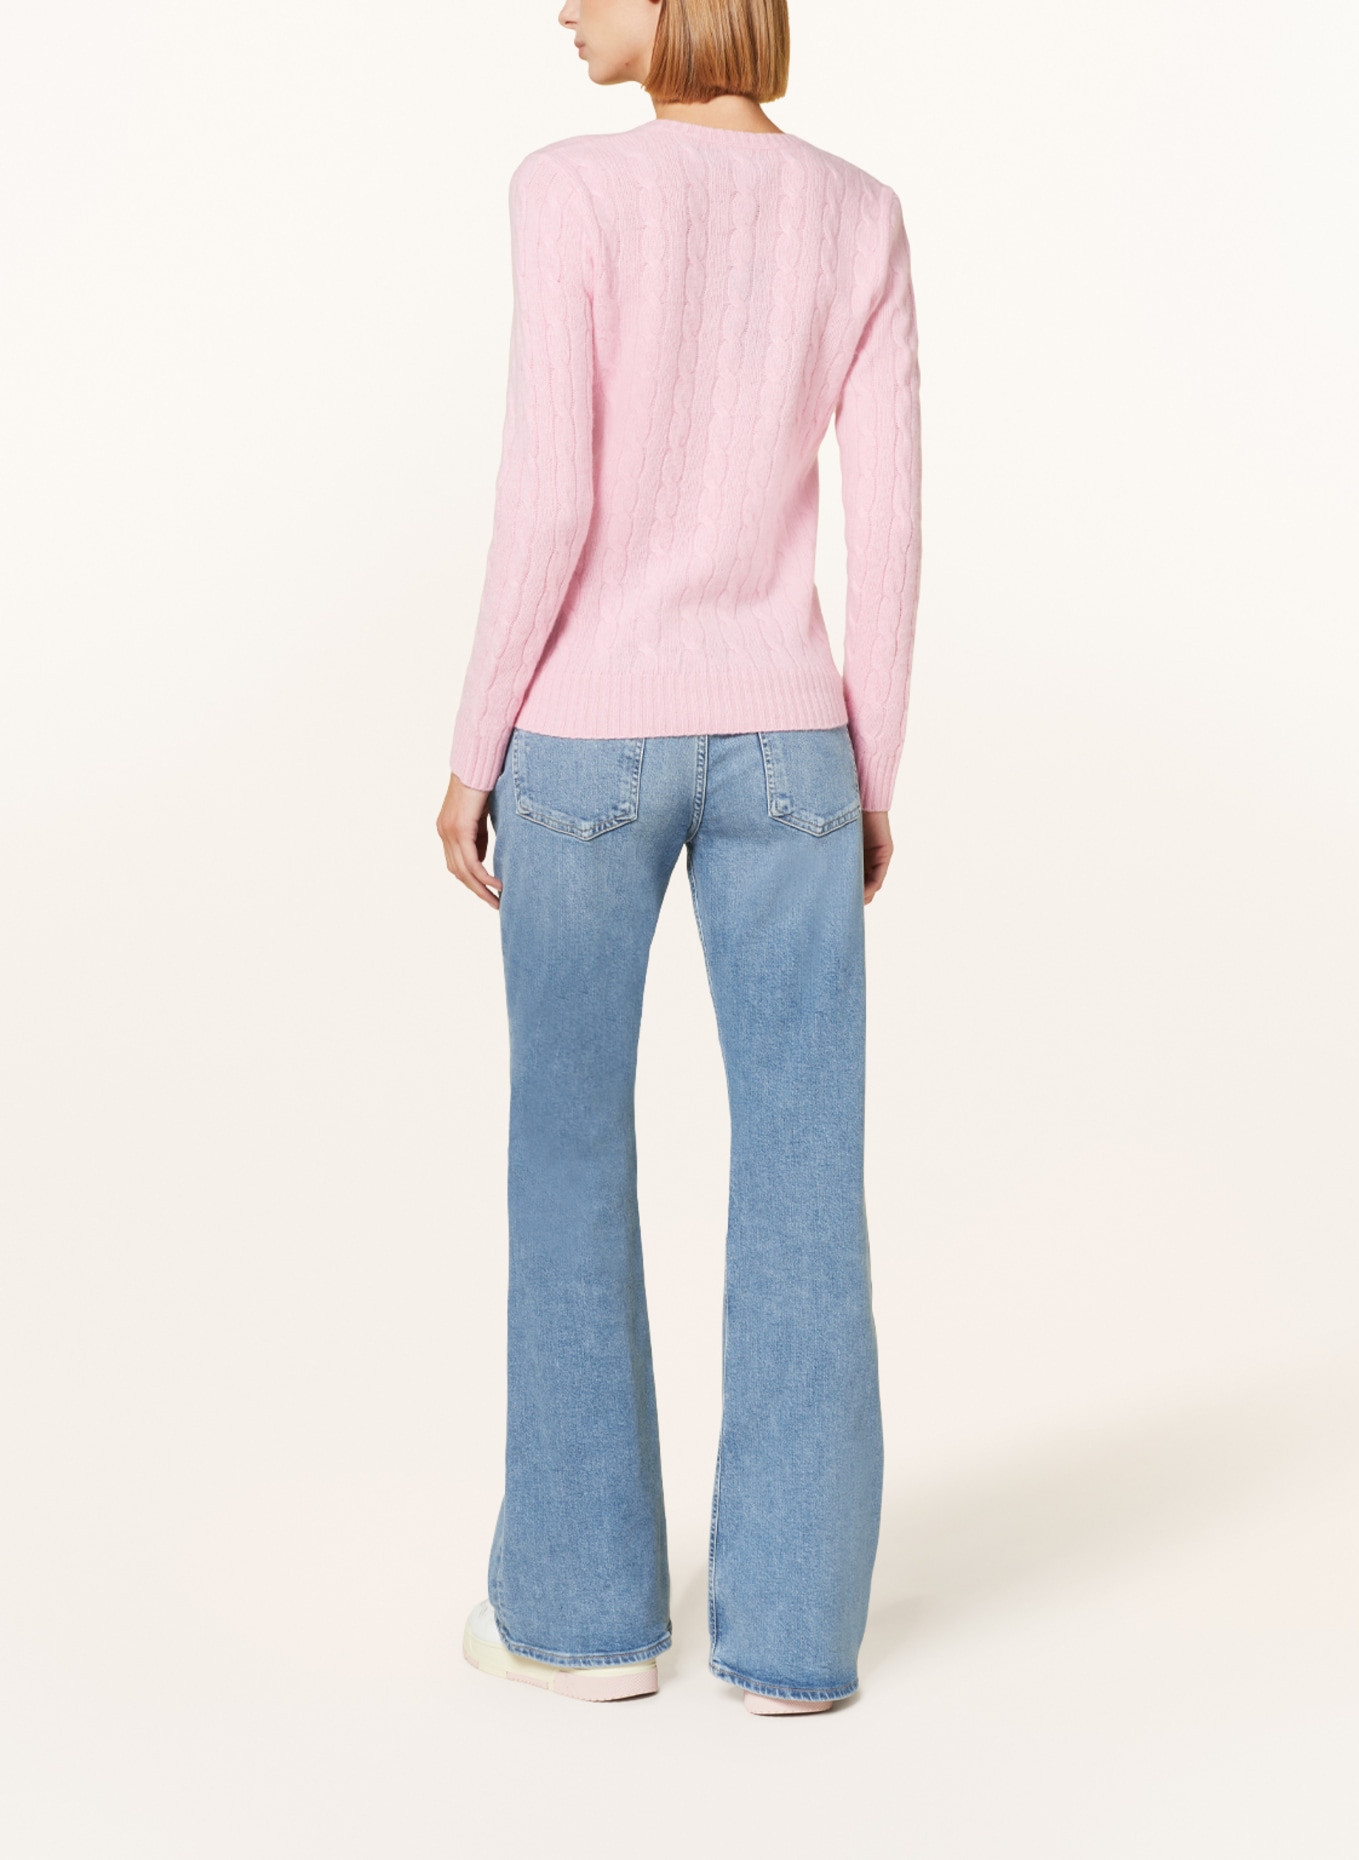 POLO RALPH LAUREN Sweater, Color: PINK (Image 3)